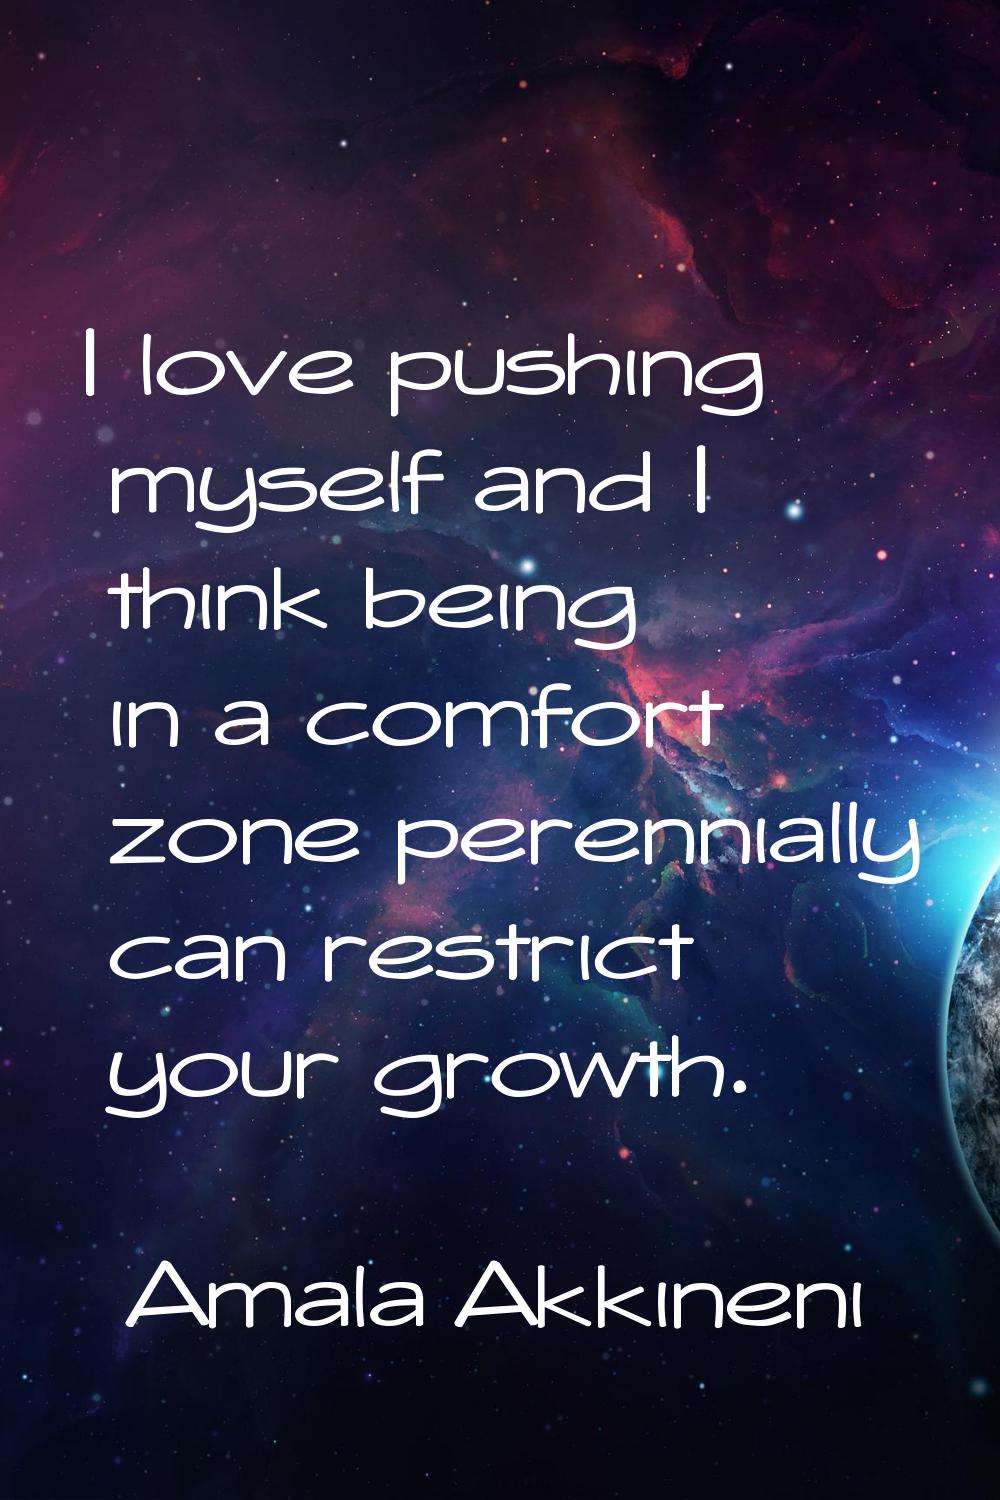 I love pushing myself and I think being in a comfort zone perennially can restrict your growth.